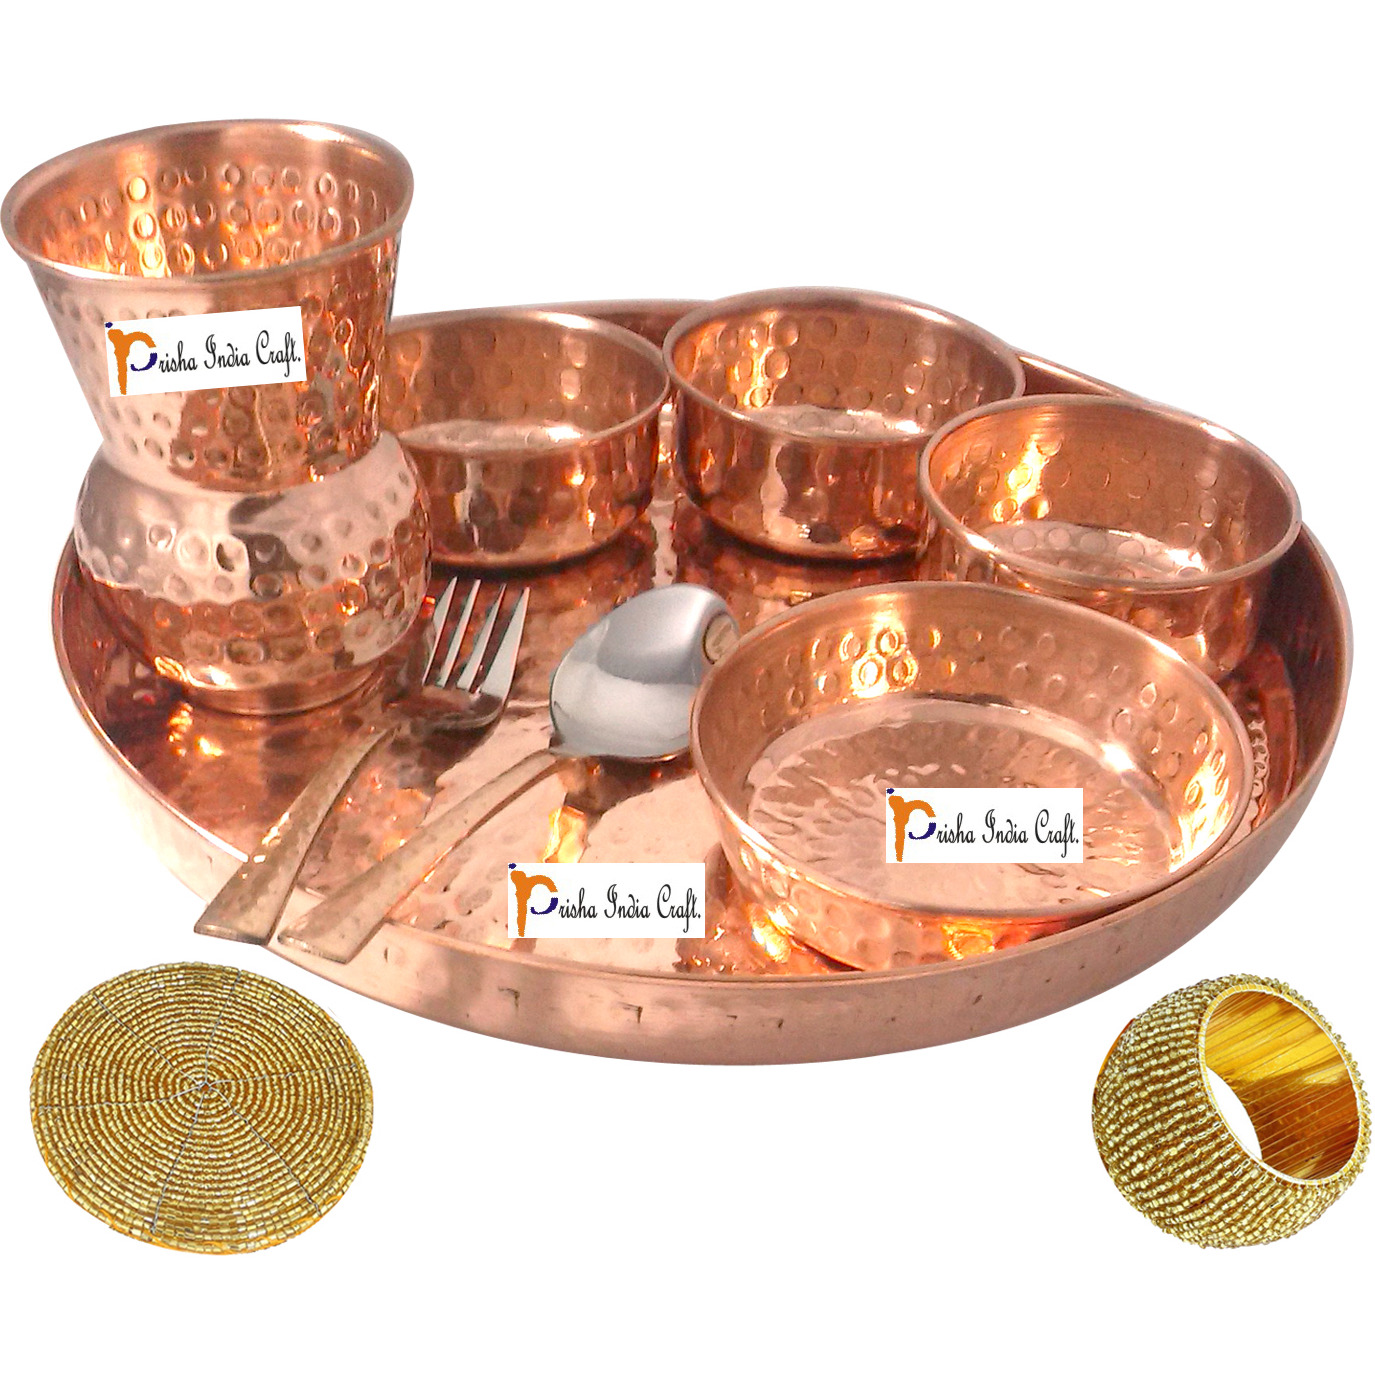 Set of 2 Prisha India Craft B. Indian Dinnerware Pure Copper Thali Set Dia 12  Traditional Dinner Set of Plate, Bowl, Spoons, Glass with Napkin ring and Coaster - Christmas Gift